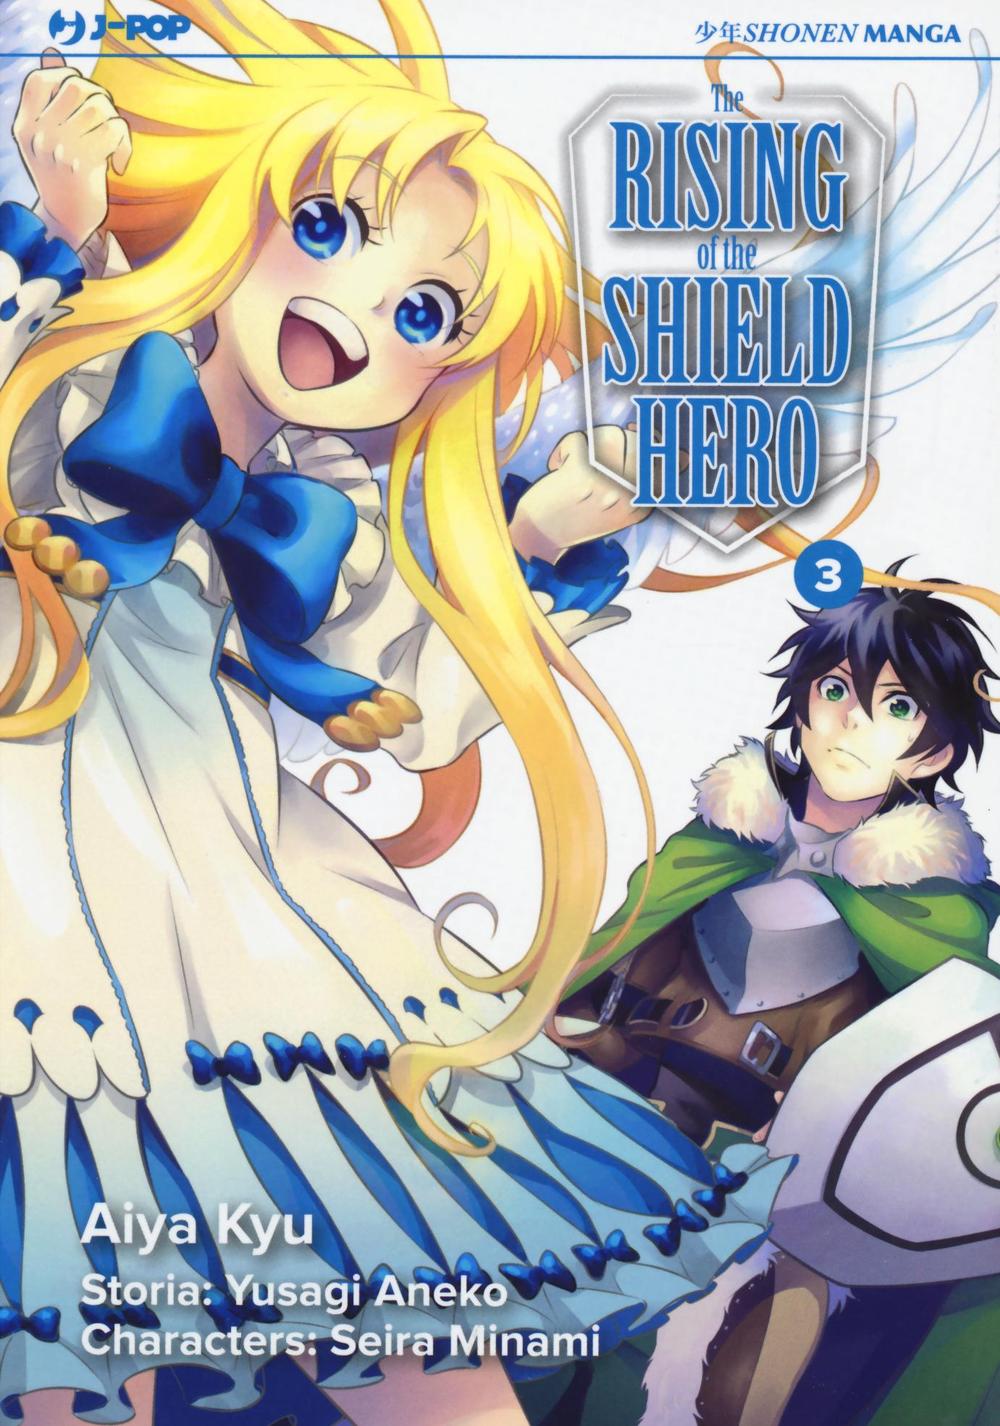 The rising of the shield hero. Vol. 3.